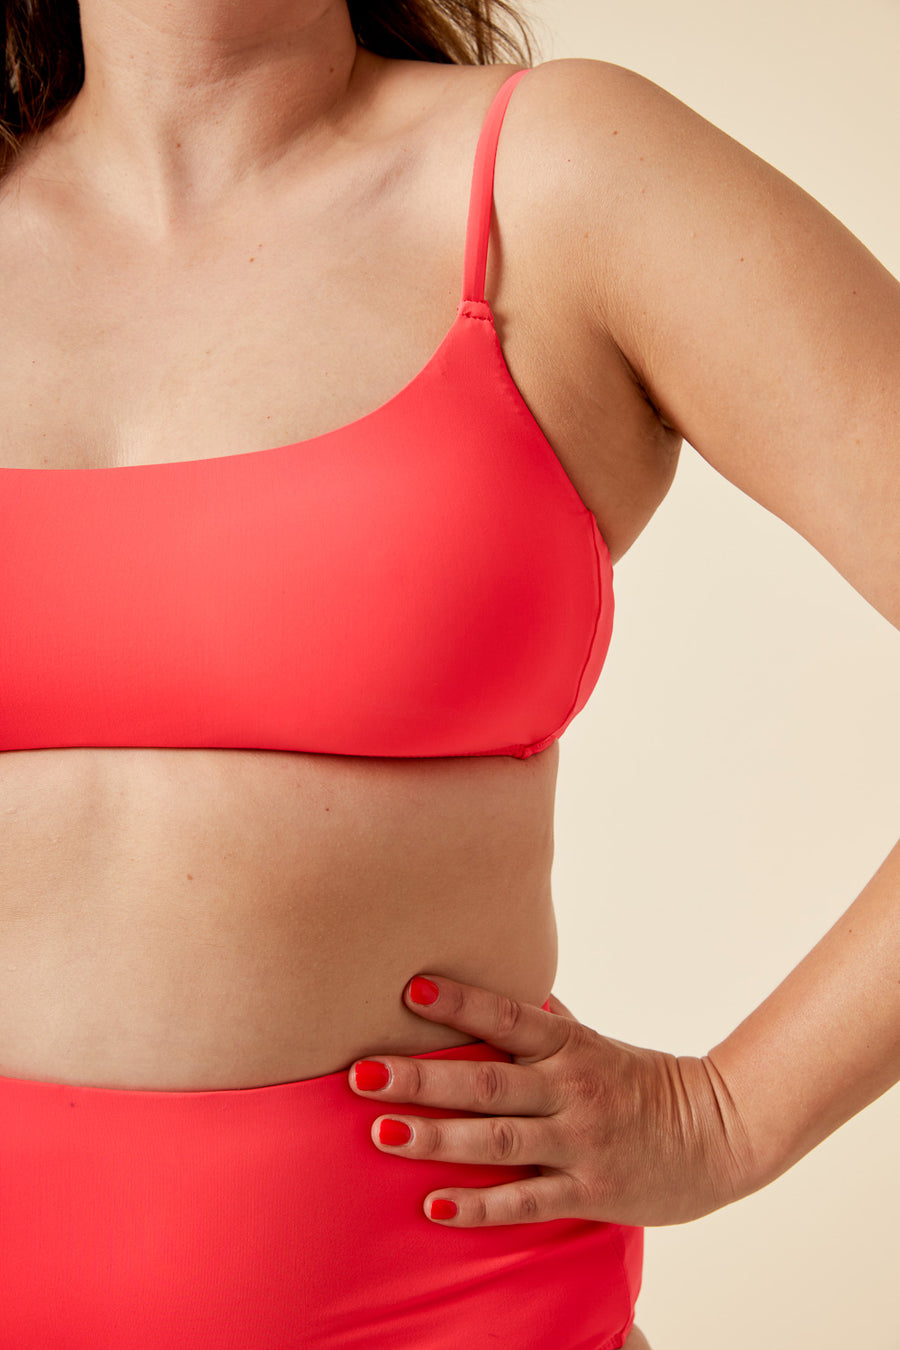 10 Stylish Sport Bras You're Going To Love - The Singapore Women's Weekly